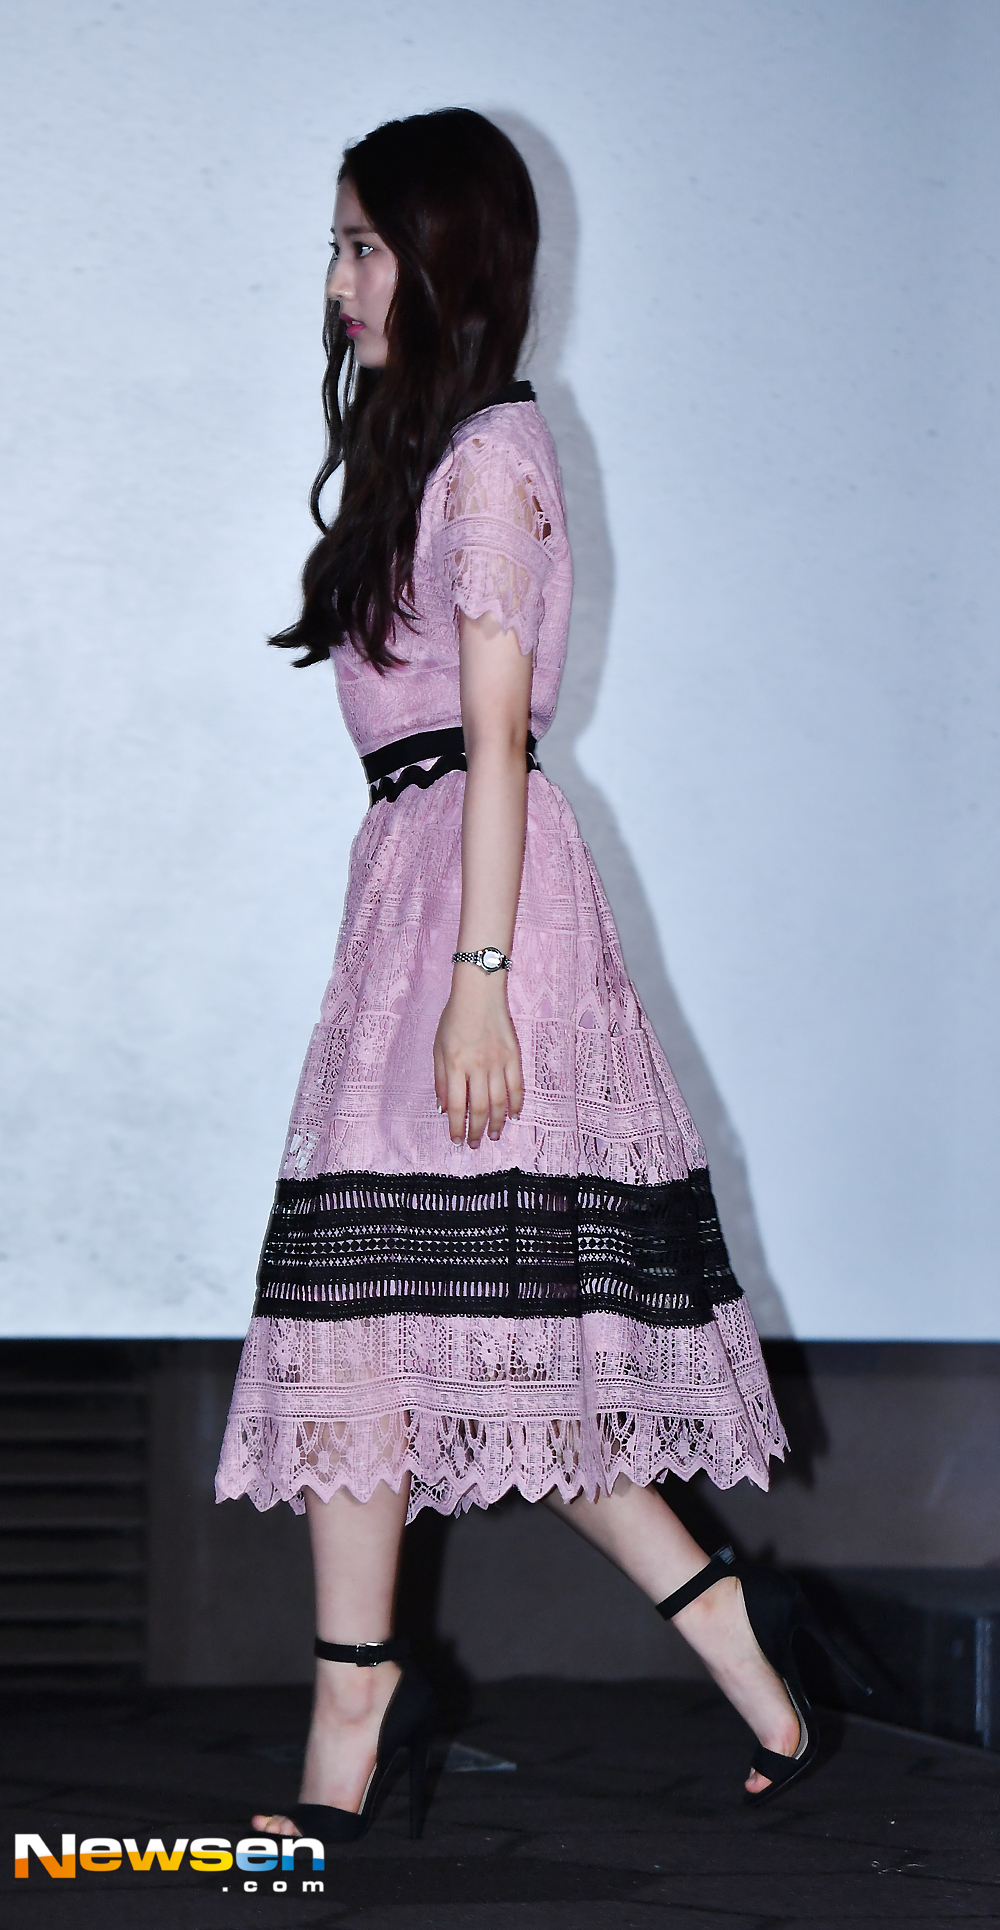 The premiere of the movie Girls A was held at the entrance of Lotte Cinema Counter in Gwangjin-gu, Seoul on June 4On that day, Jeong Da-bin responded to the photo pose.The premiere of the middle school girl A media distribution was attended by Lee Kyung-seop, Actor Kim Hwan-hee, Suho (guard), Jeong Da-bin, Yoo Jae-sang, Jung Da Eun and Lee Jong Hyuk.expressiveness